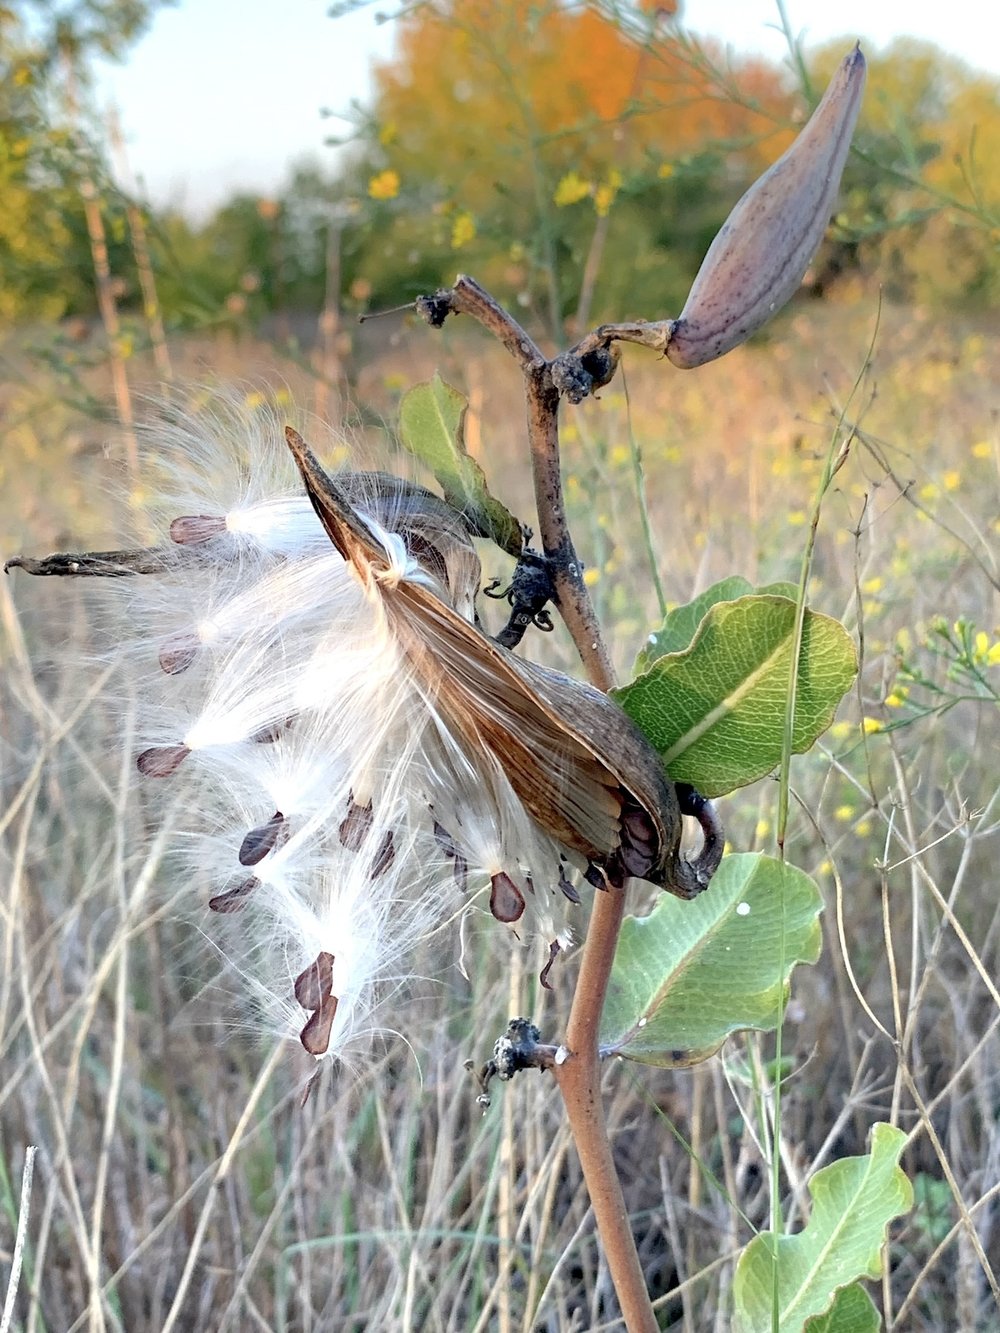  Another view of  Green Comet Milkweed  ( Asclepias viridiflora ) seed dispersal. 